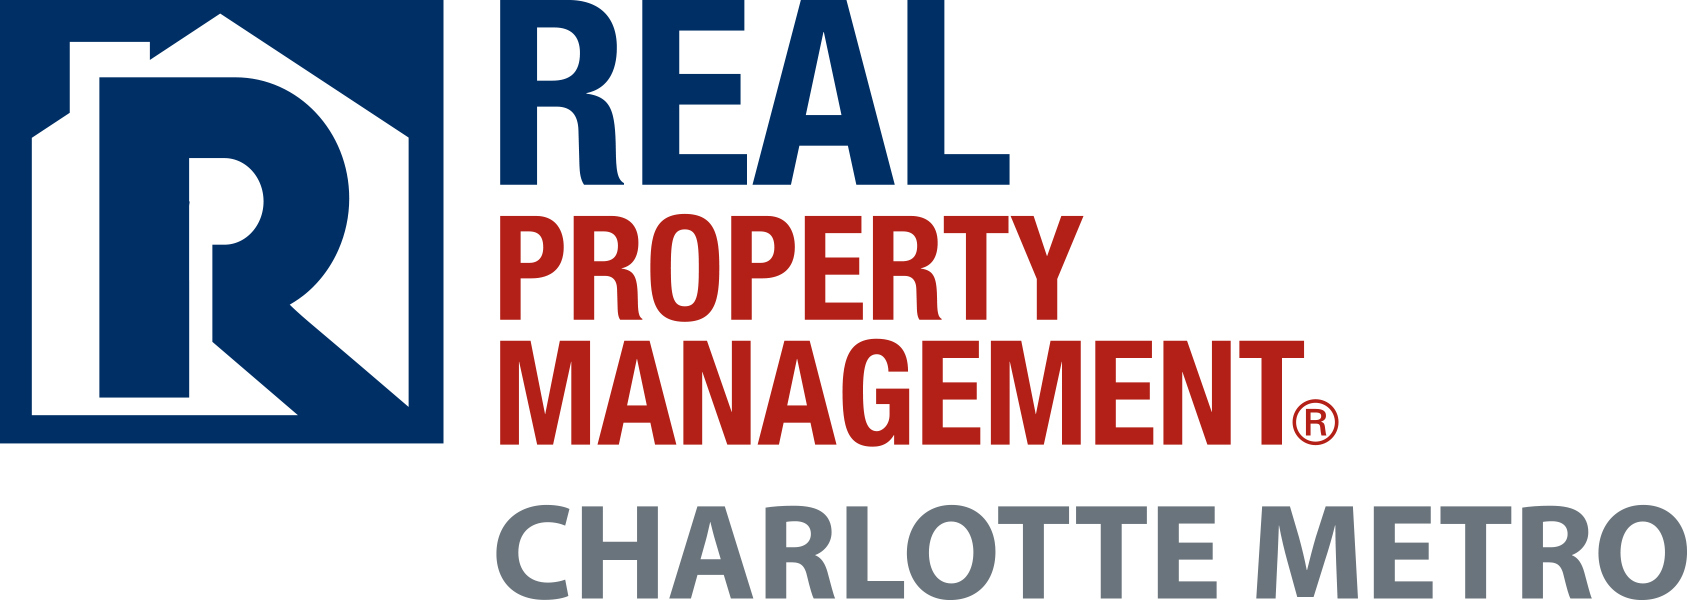 Real property Management Charlotte Metro